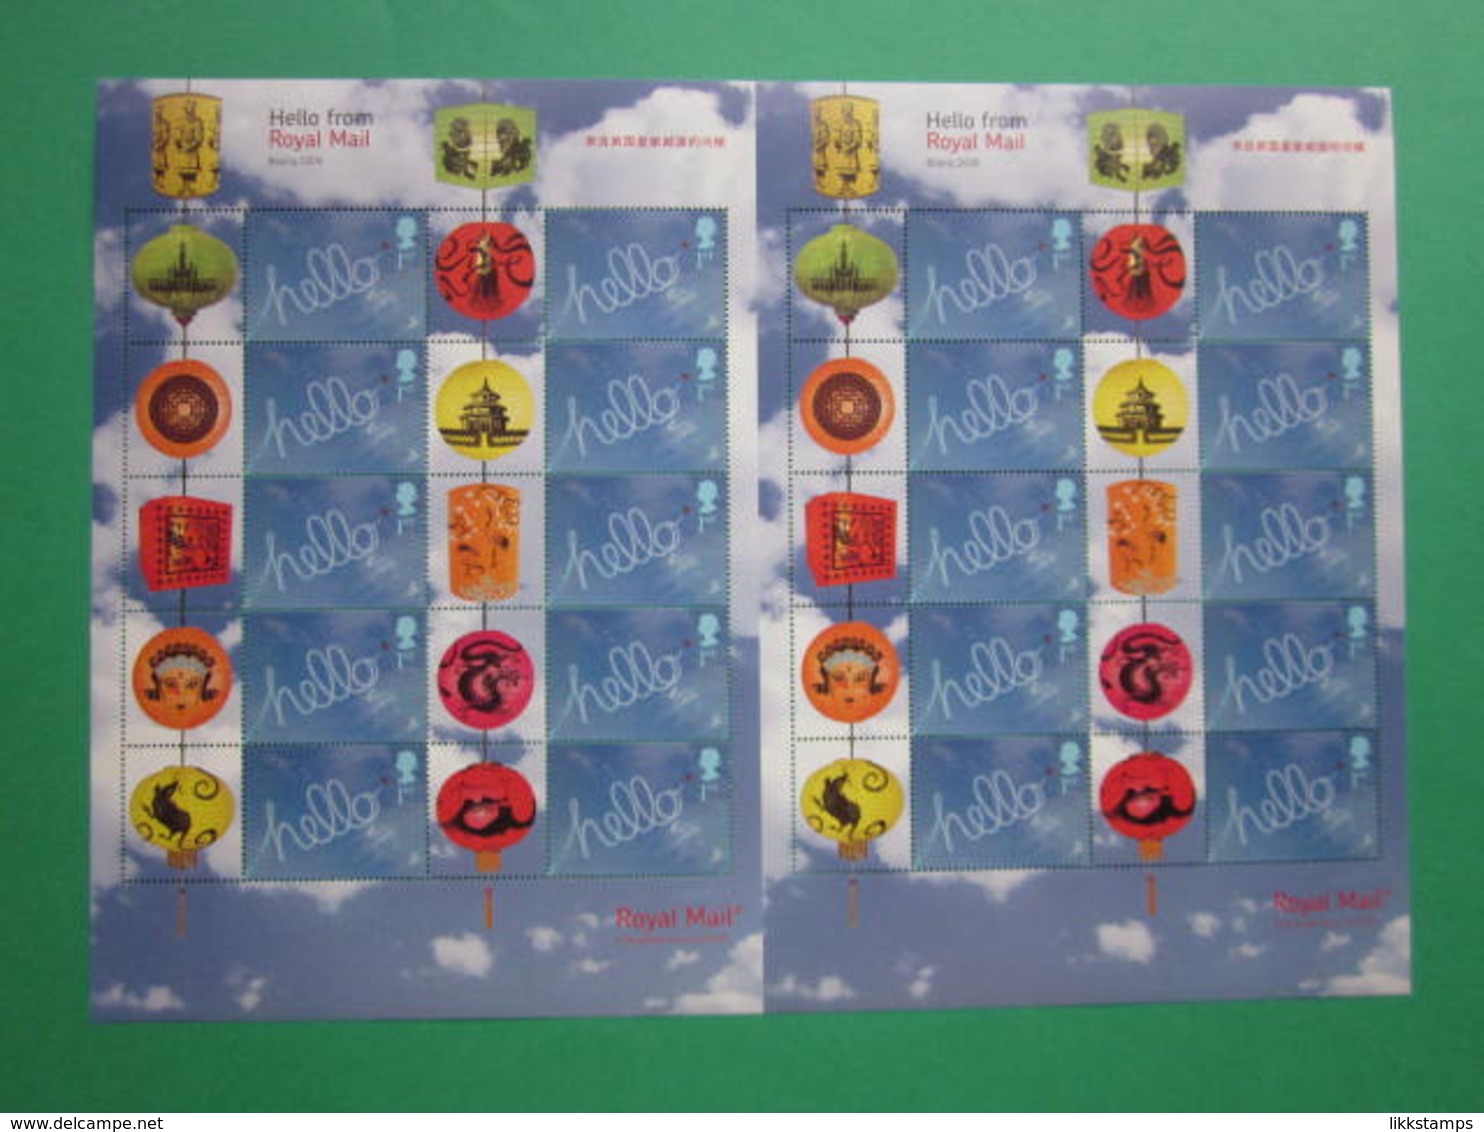 2008 ROYAL MAIL BEIJING 2008 OLYMPIC EXPO GENERIC SMILERS SHEET. #SS0050 - Smilers Sheets